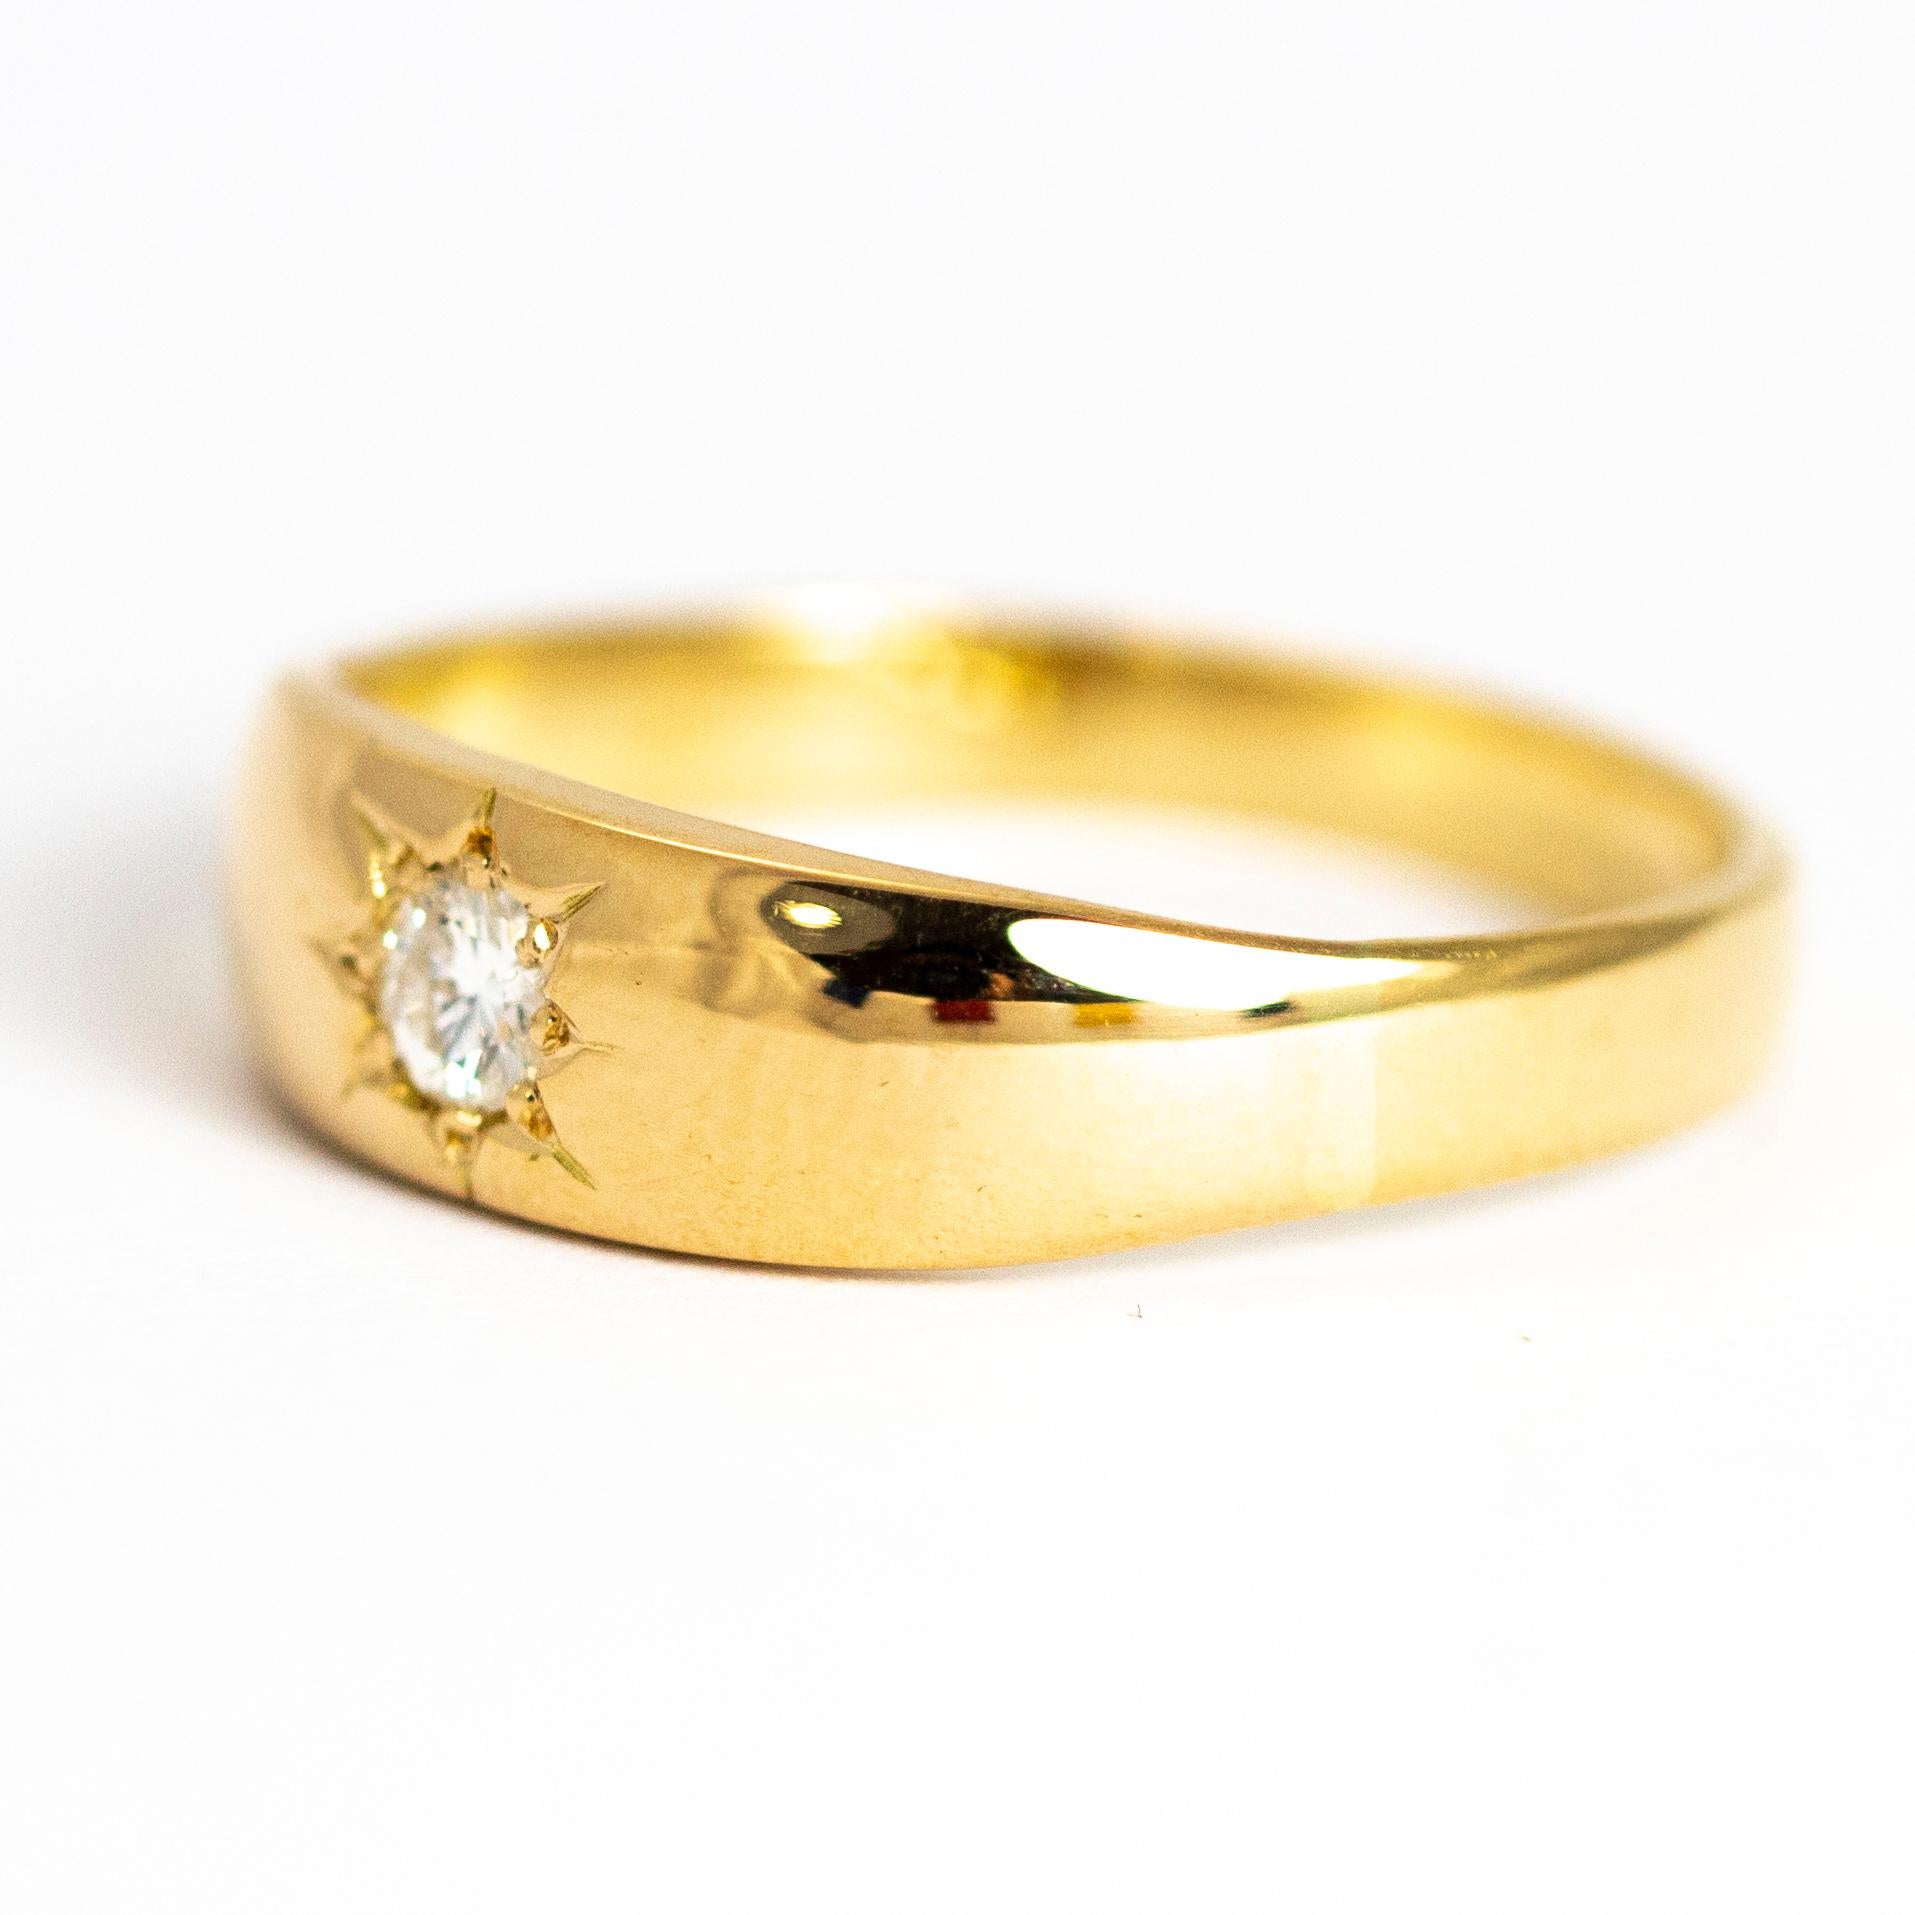 The old mine cut diamond in this ring is bright and clean and measures 15pts. It is so sparkly and sits in a lovely star setting. This ring is modelled in 18ct gold and is so simple and stylish. 

Ring Size: Q or 8 
Band Width: 5.5mm